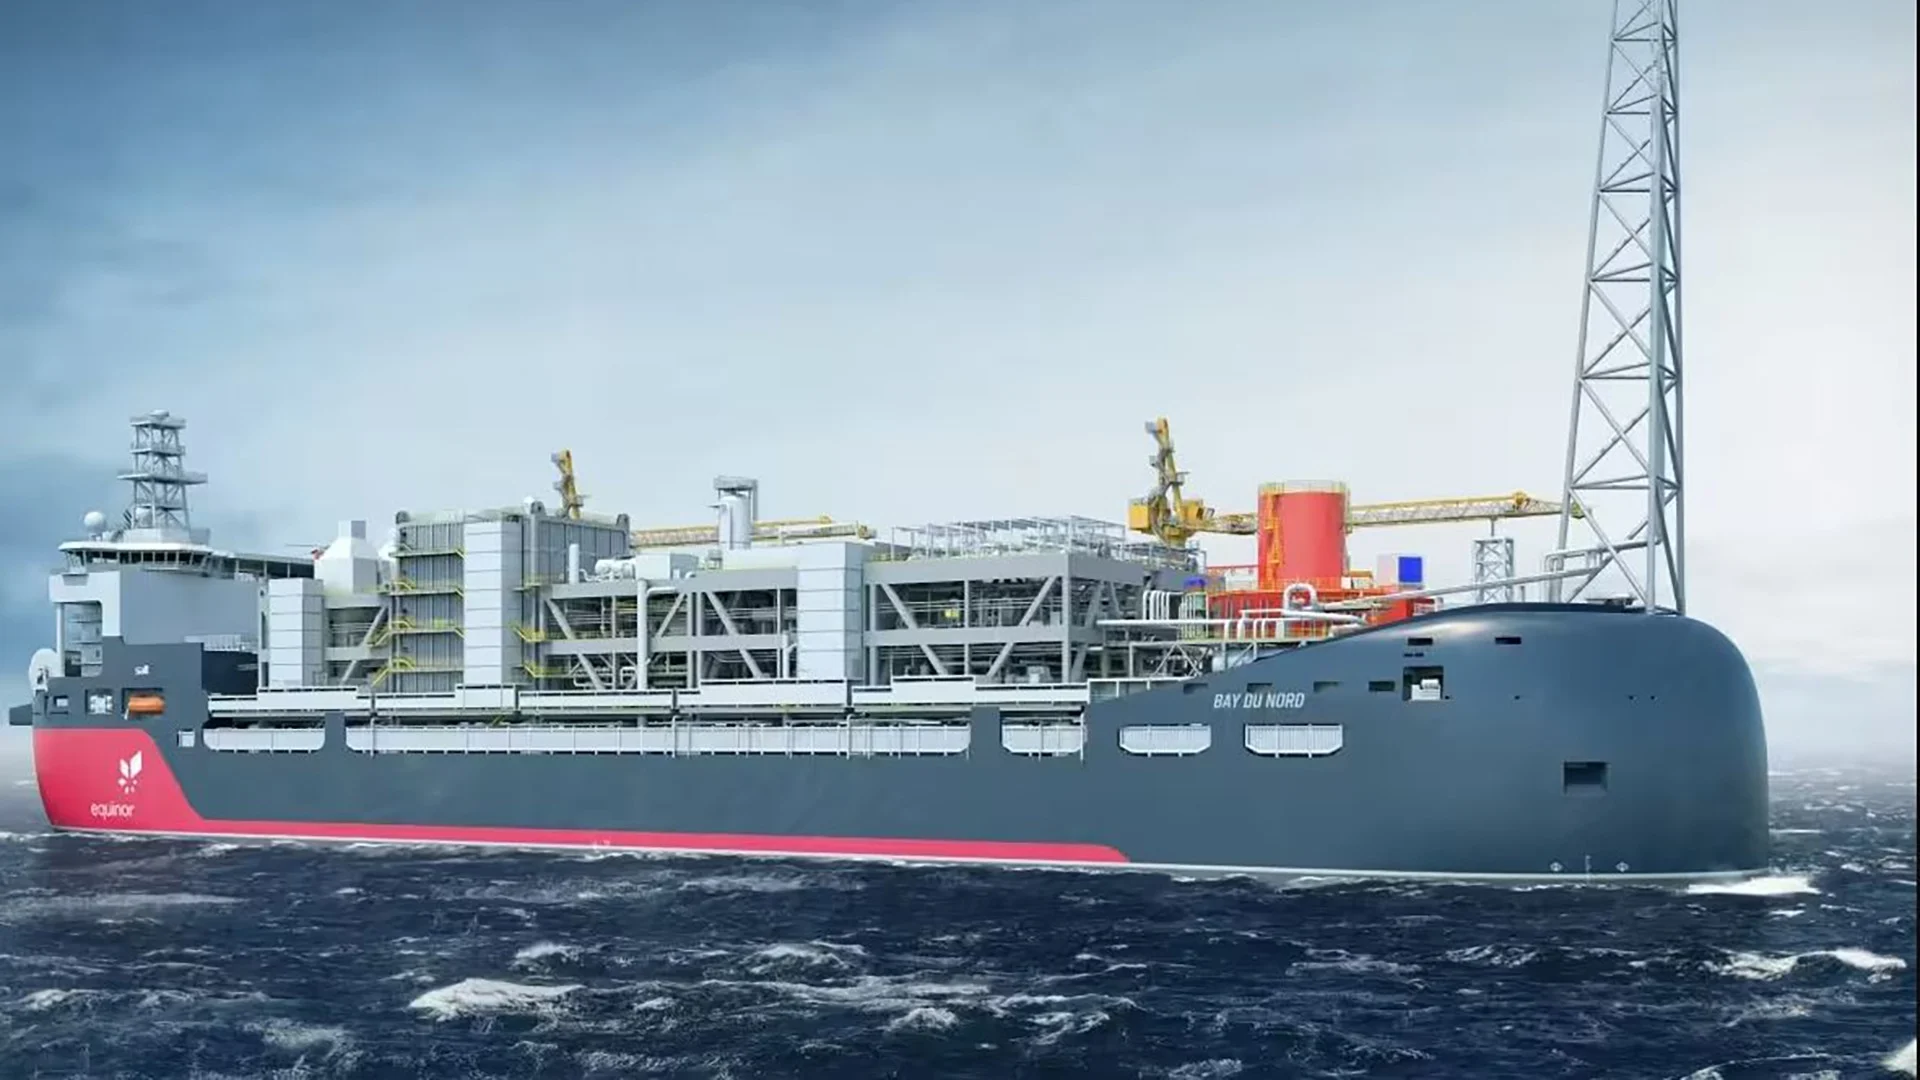 Bay du Nord on hold for three years, Equinor announces